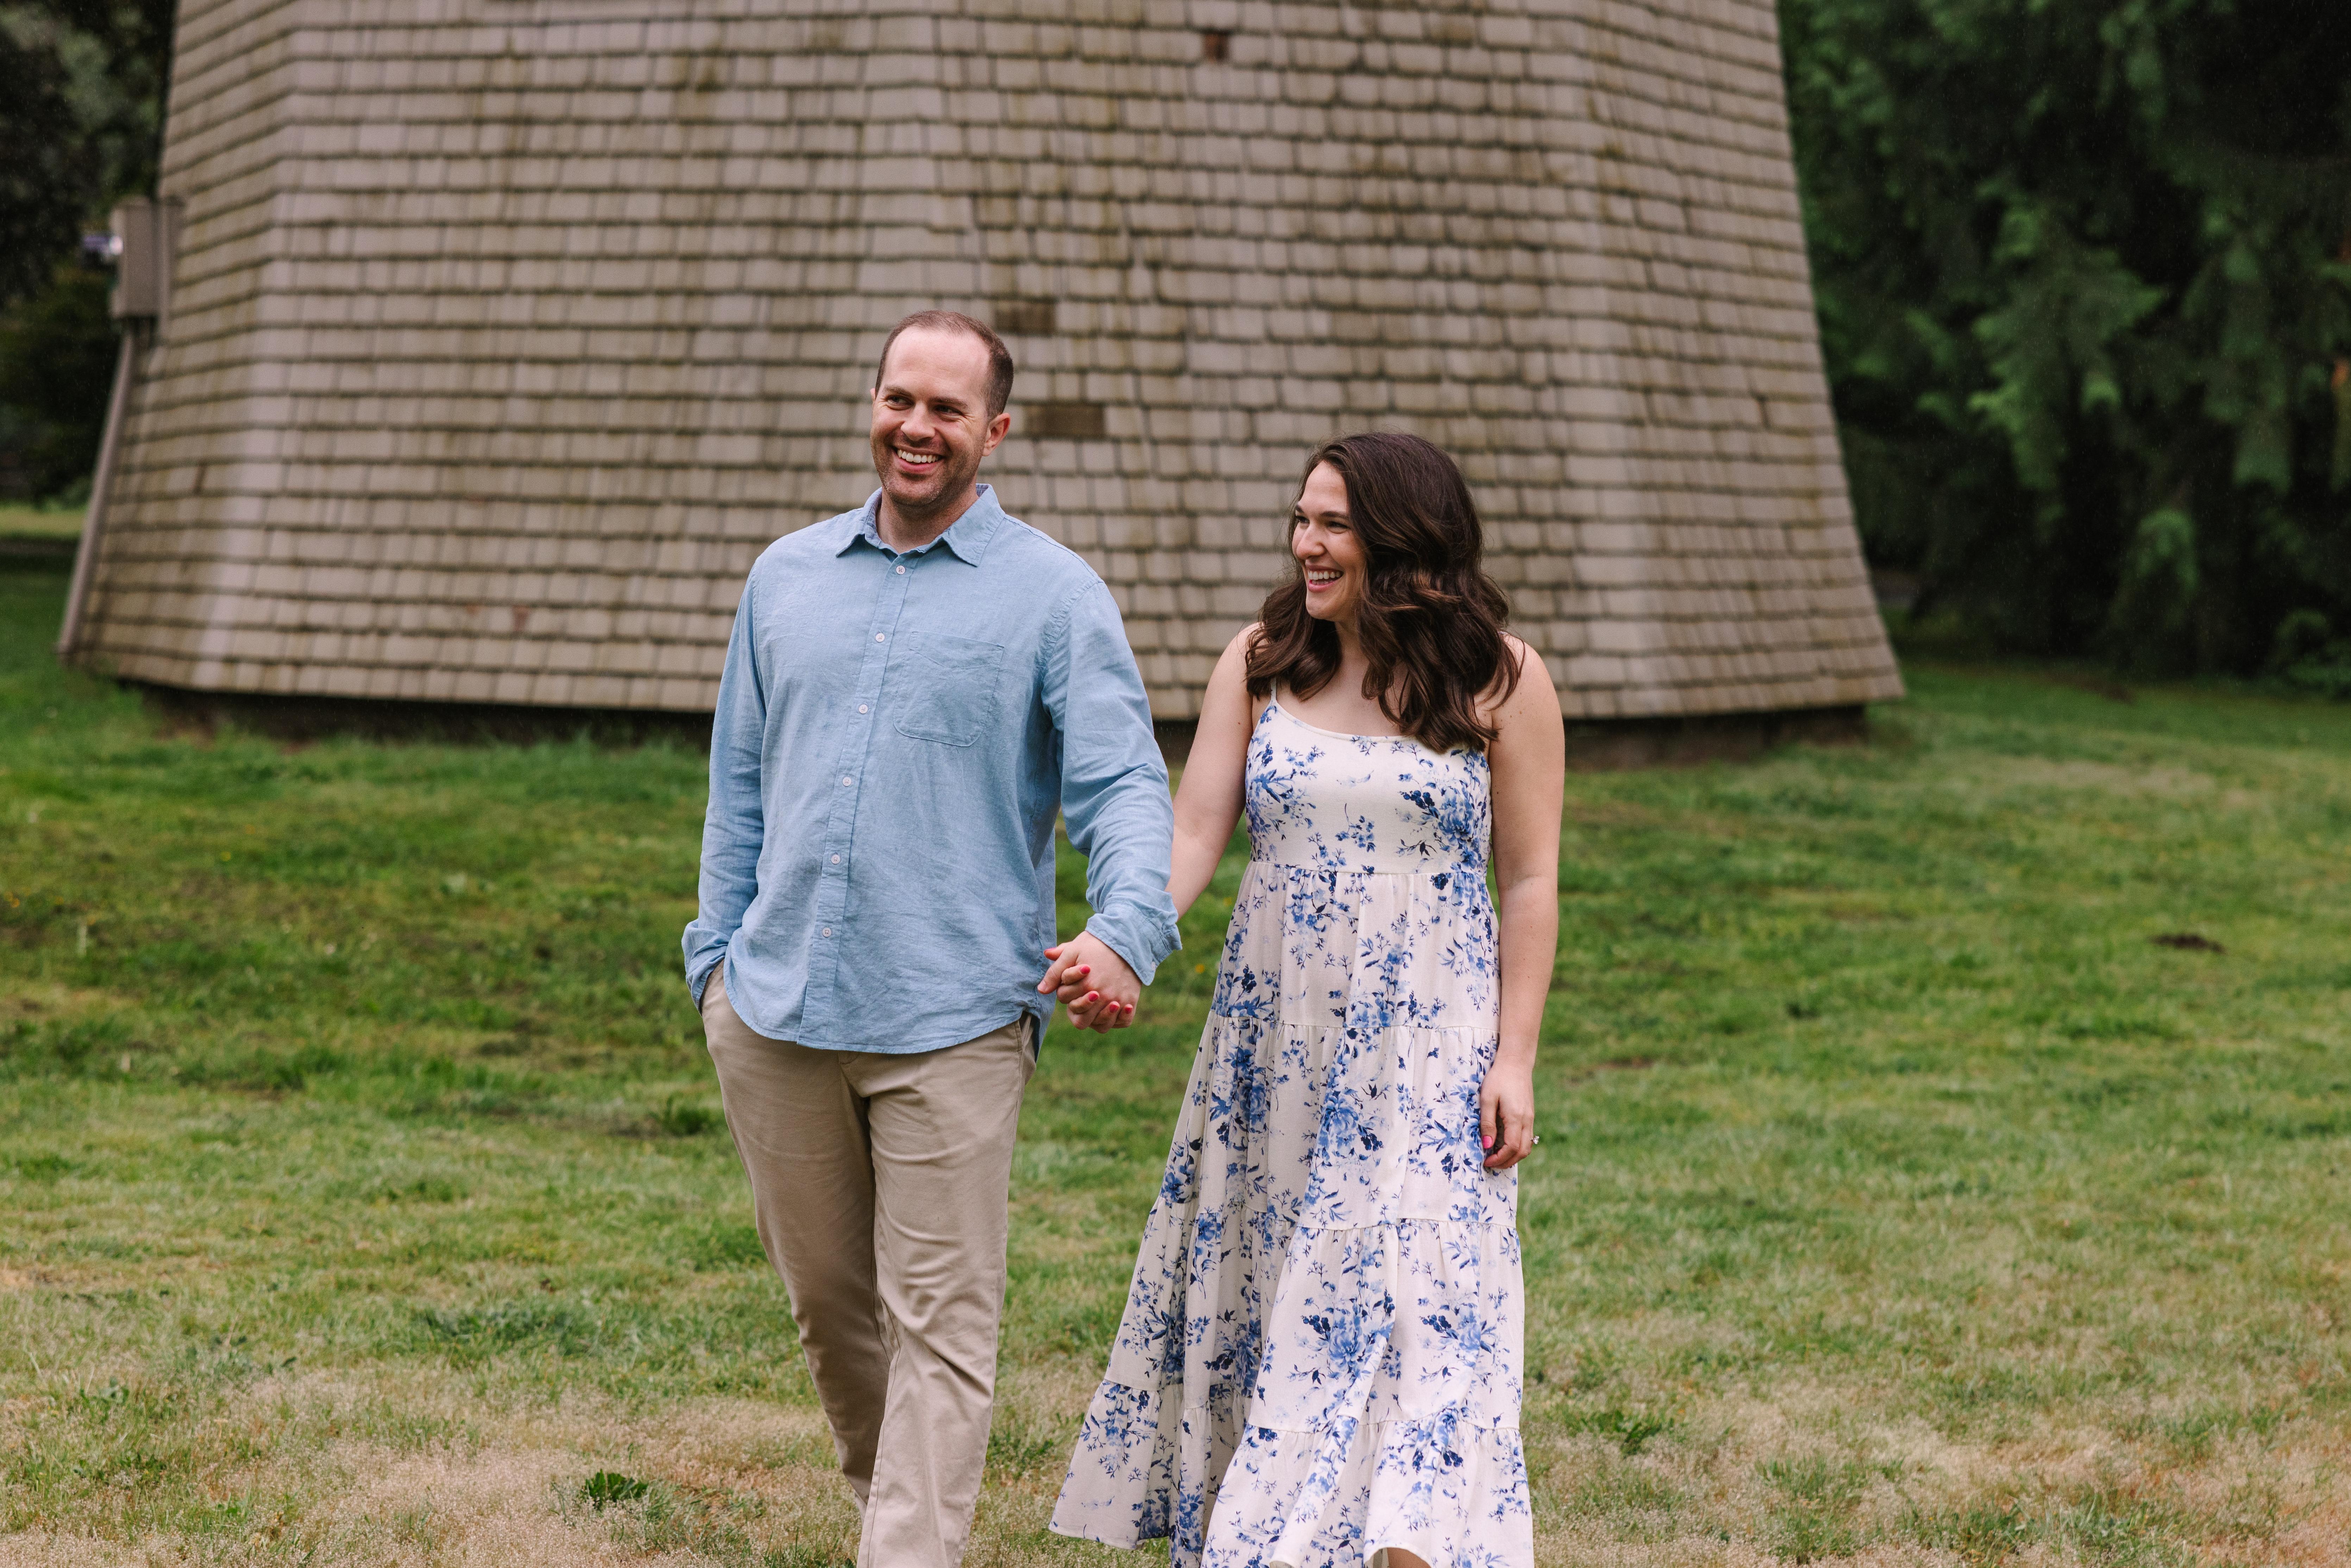 The Wedding Website of Claire Theodorescu and Kyle McMillan